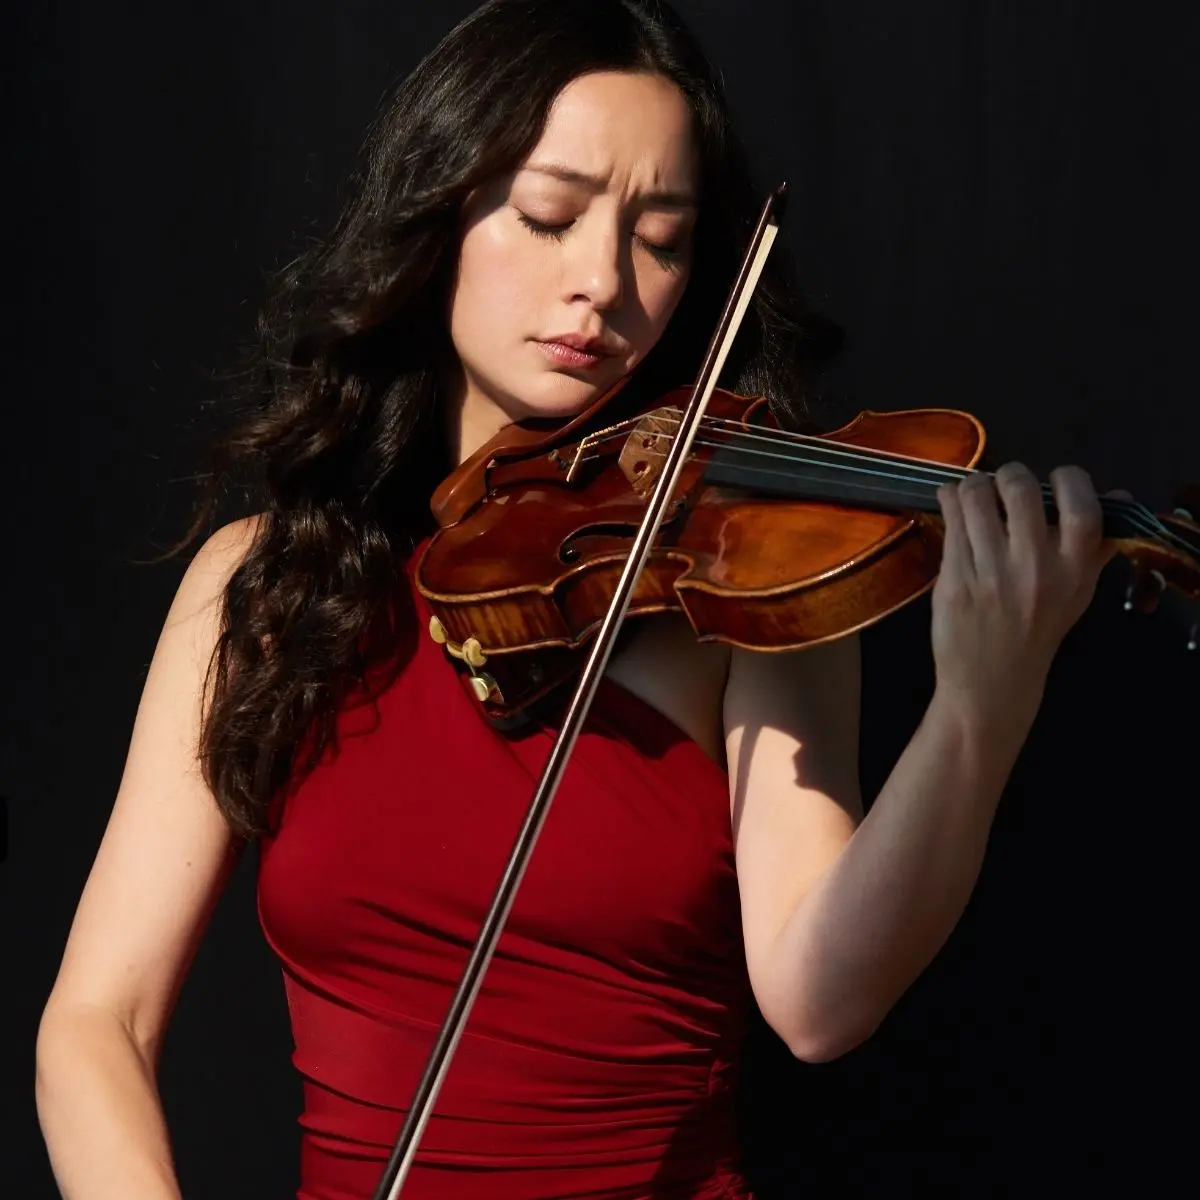 lucia violin - How did Lucia Micarelli injure her hand